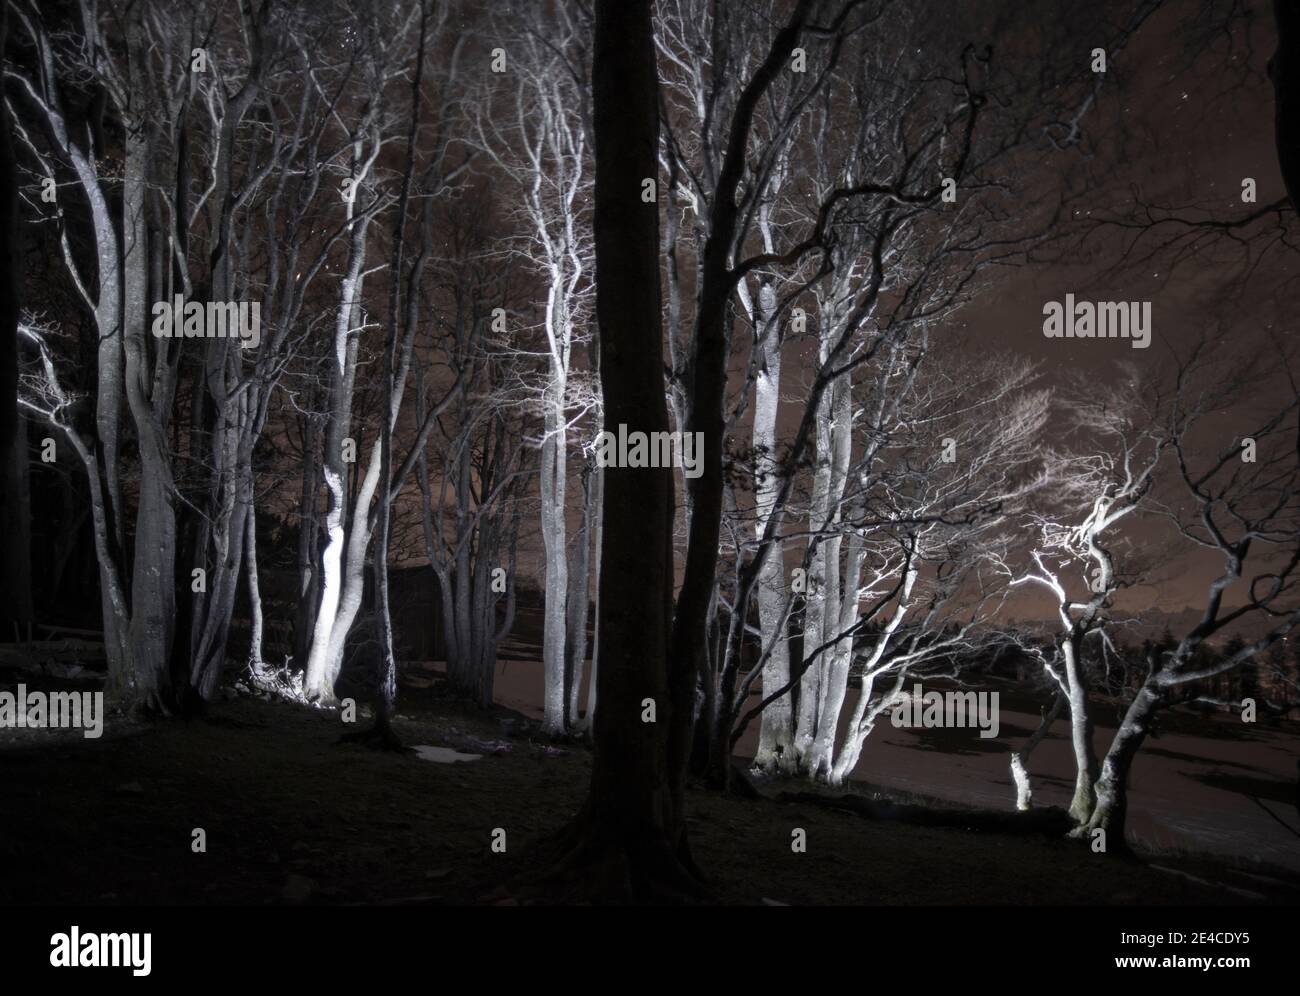 at night in the ghostly illuminated forest Stock Photo